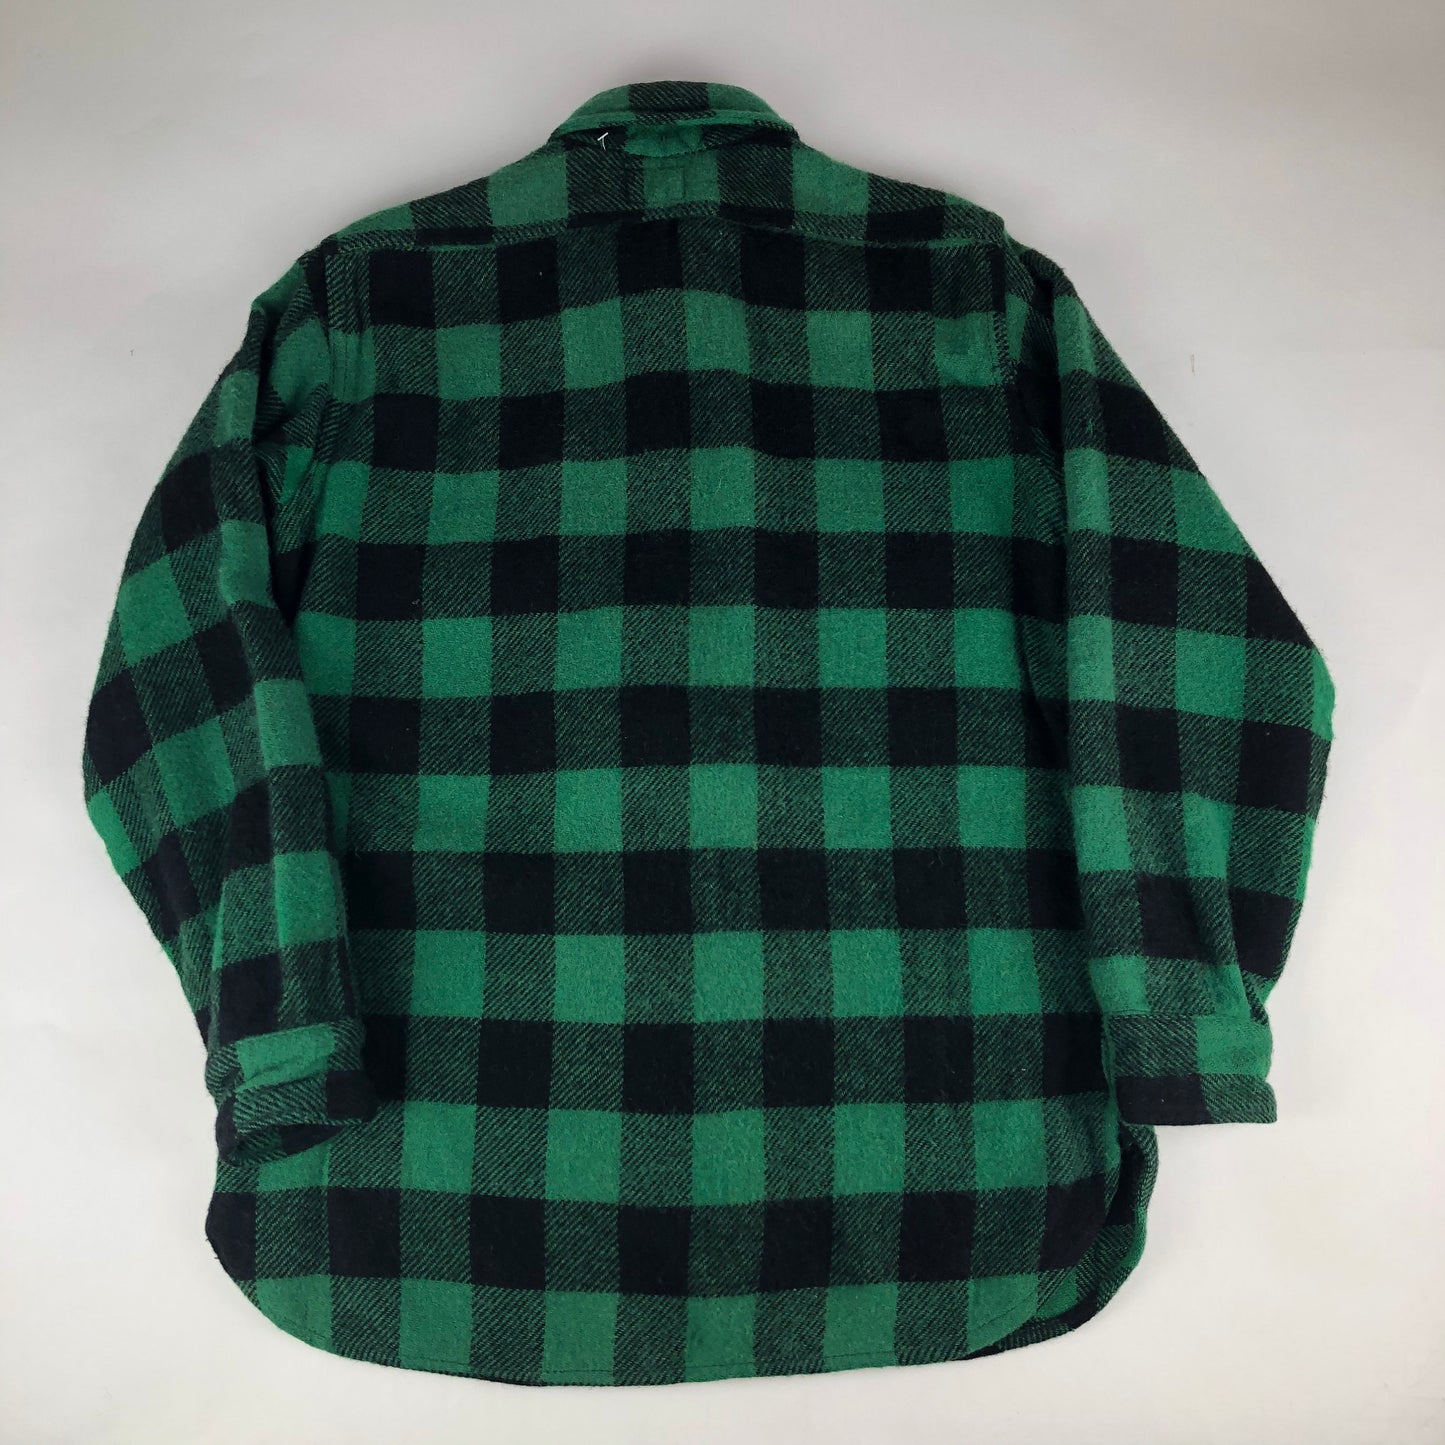 Vintage 1950s Union Made Five Brother Green Buffalo Check Plaid Wool Shirt Jacket